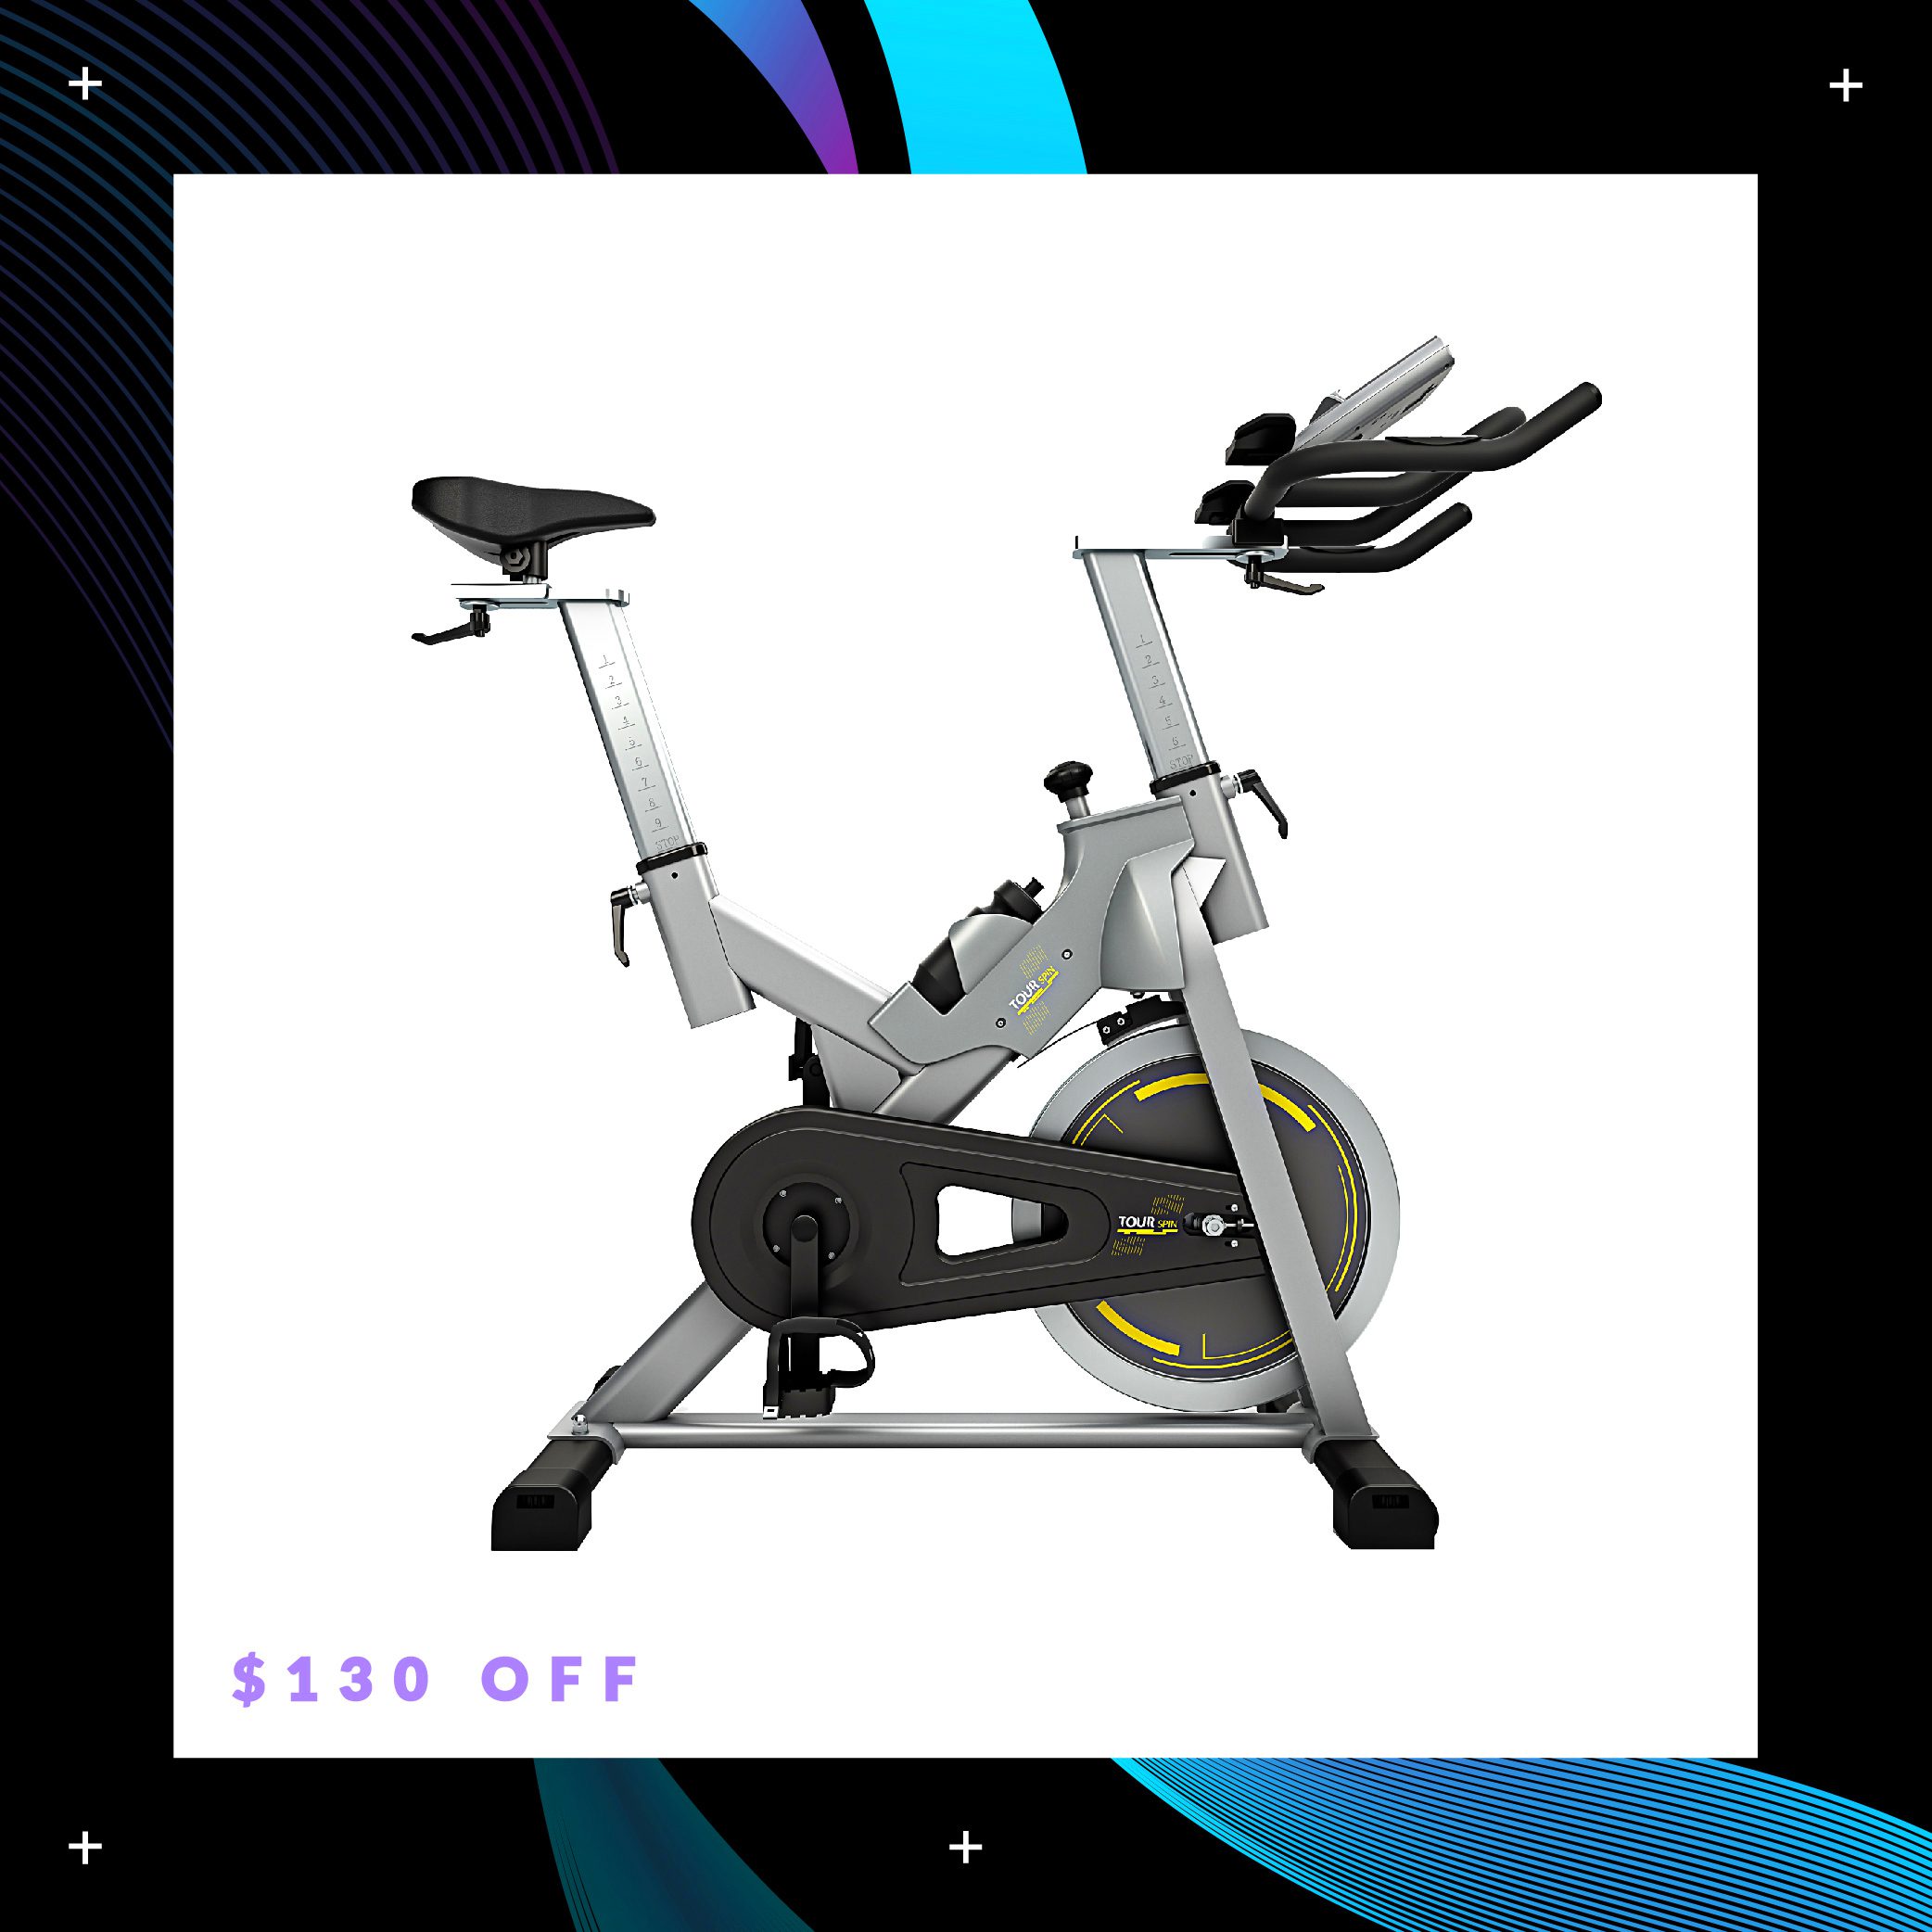 Fitness Stepper Manual Exercise Cardio Workout Bike Home Gym Equipment LCD 